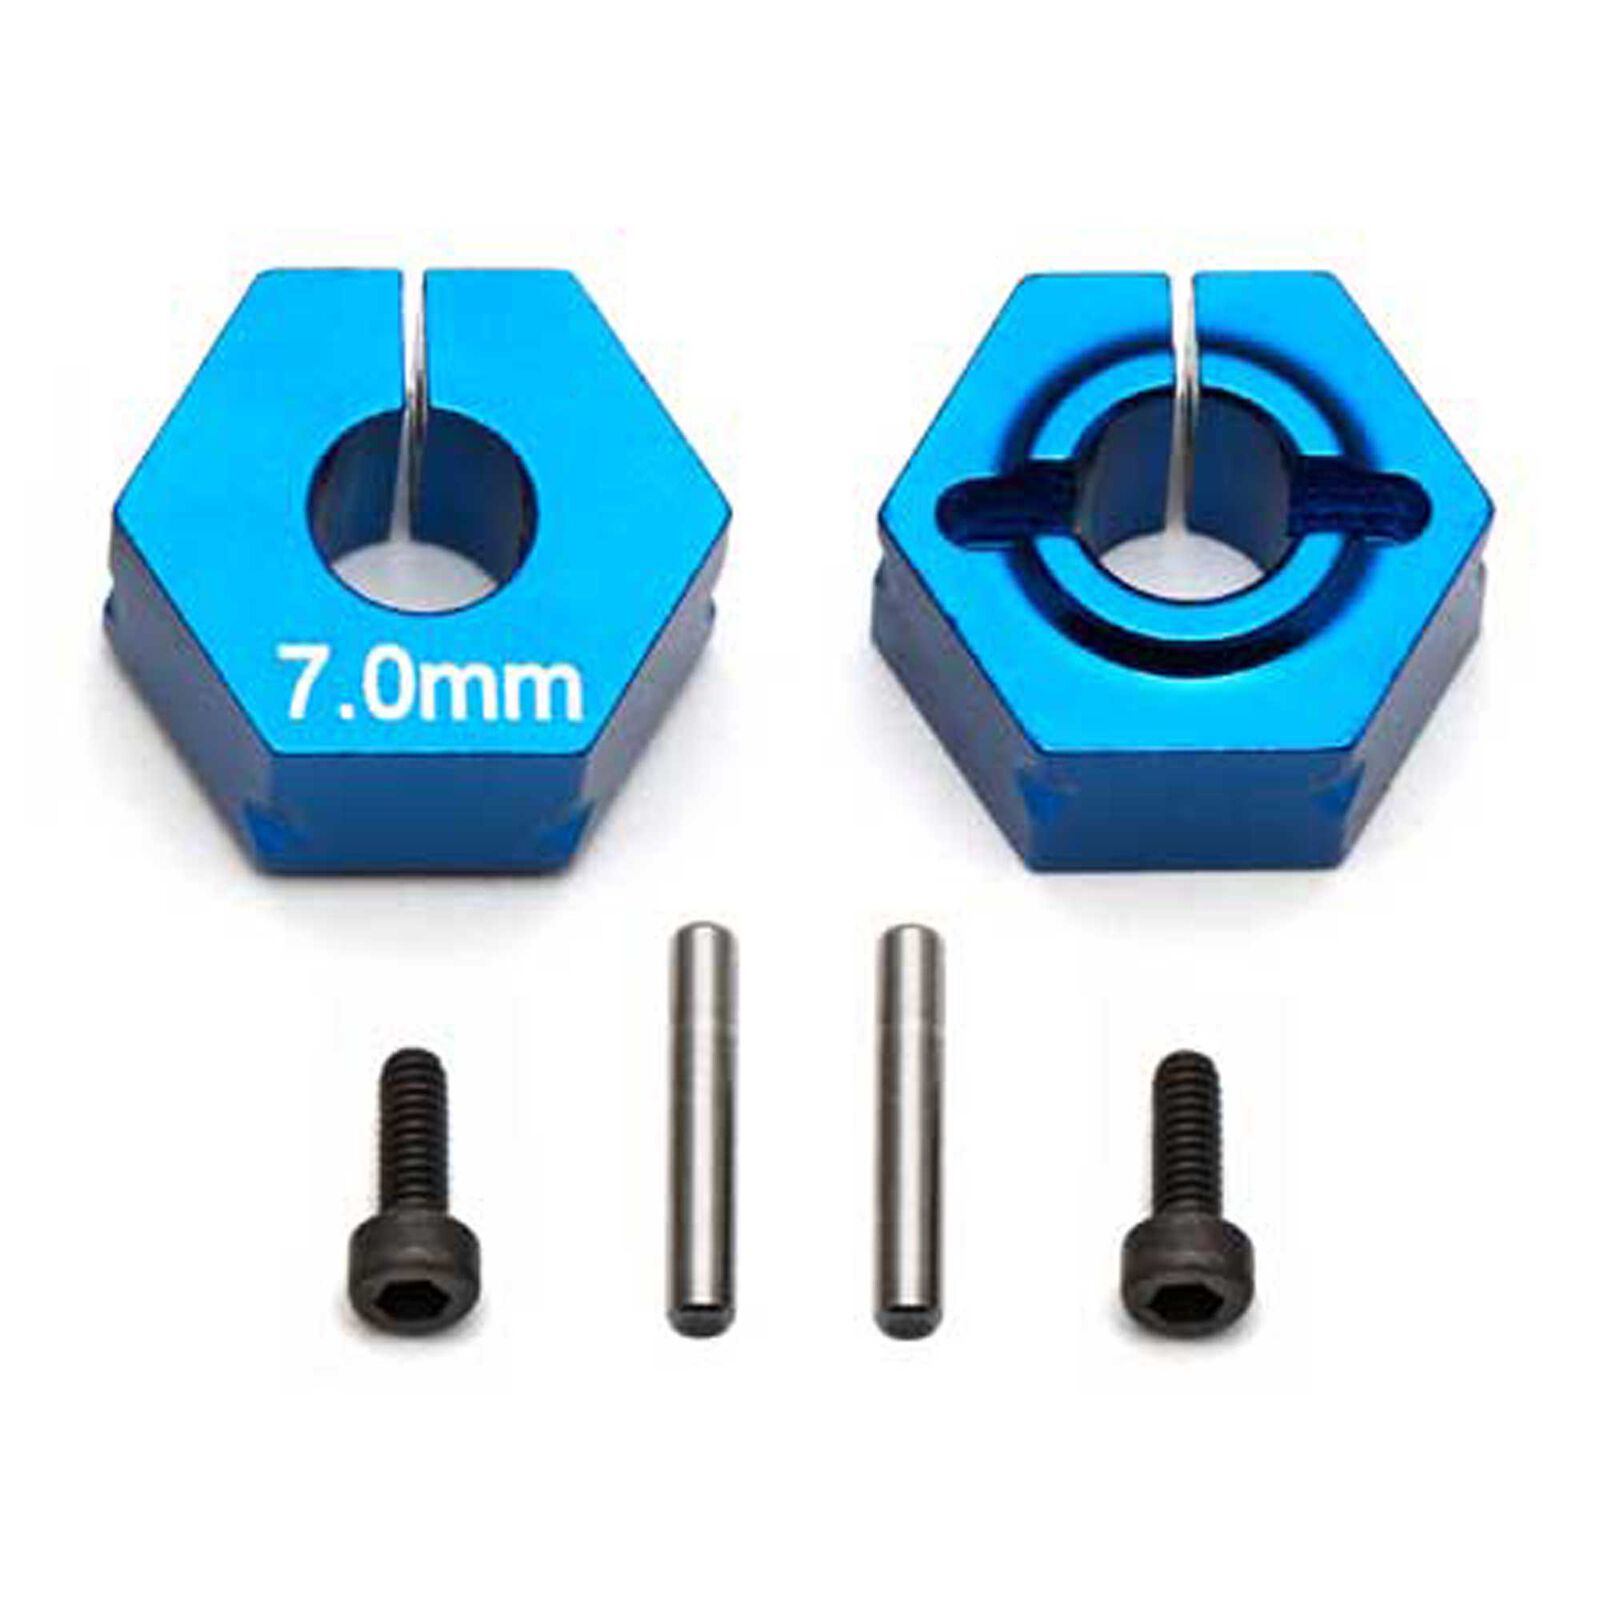 Factory Team Clamping Wheel Hexes 7.0mm